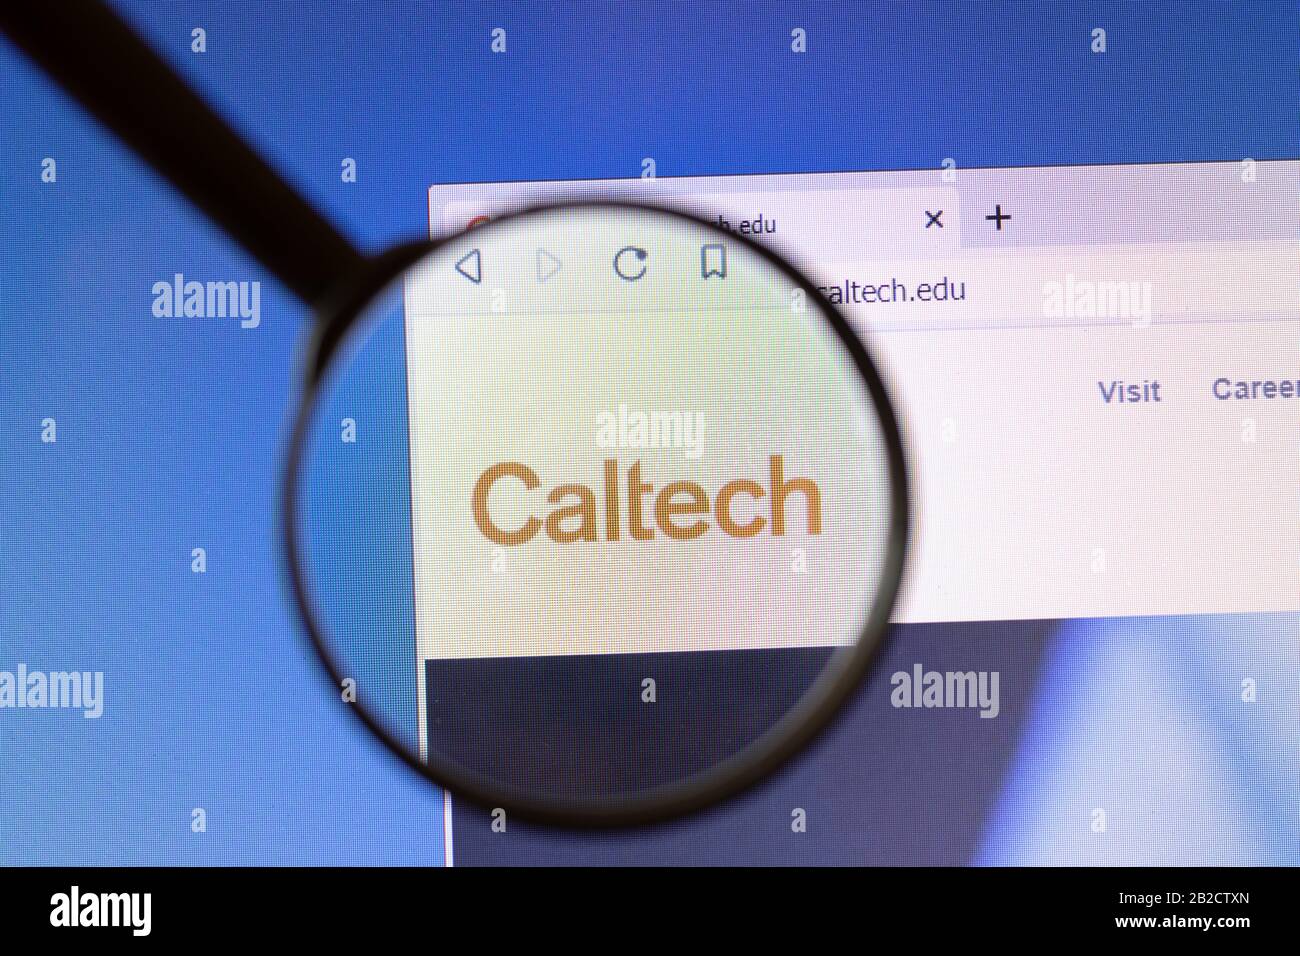 Los Angeles, California, USA - 3 March 2020: California Institute of Technology Caltech website homepage logo visible on display screen, Illustrative Stock Photo